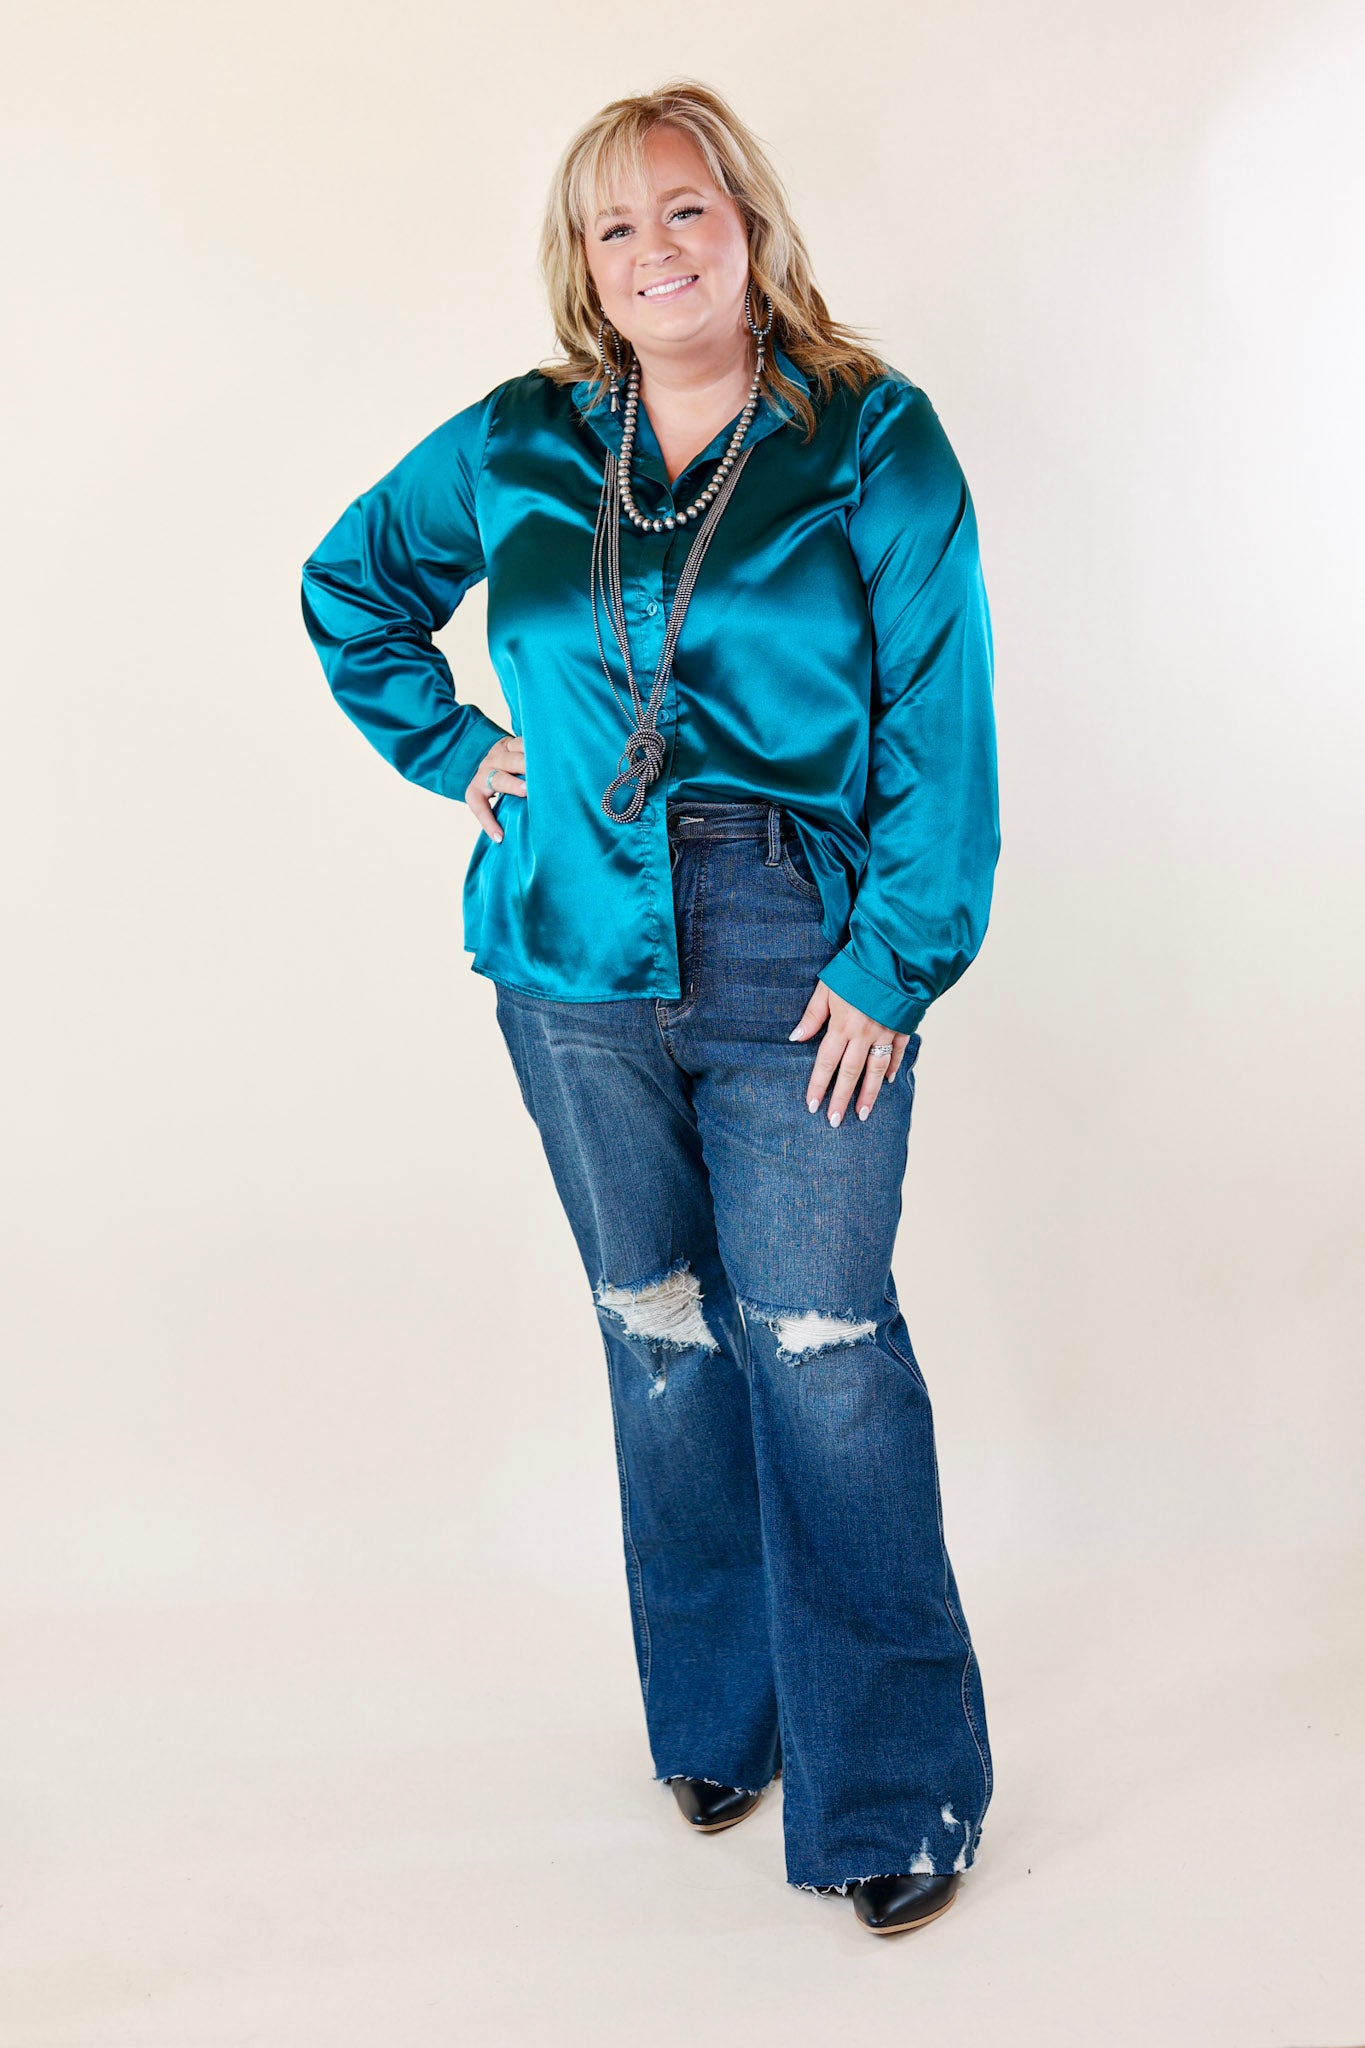 Down To Disco Satin Long Sleeve Button Up Top in Teal Blue - Giddy Up Glamour Boutique